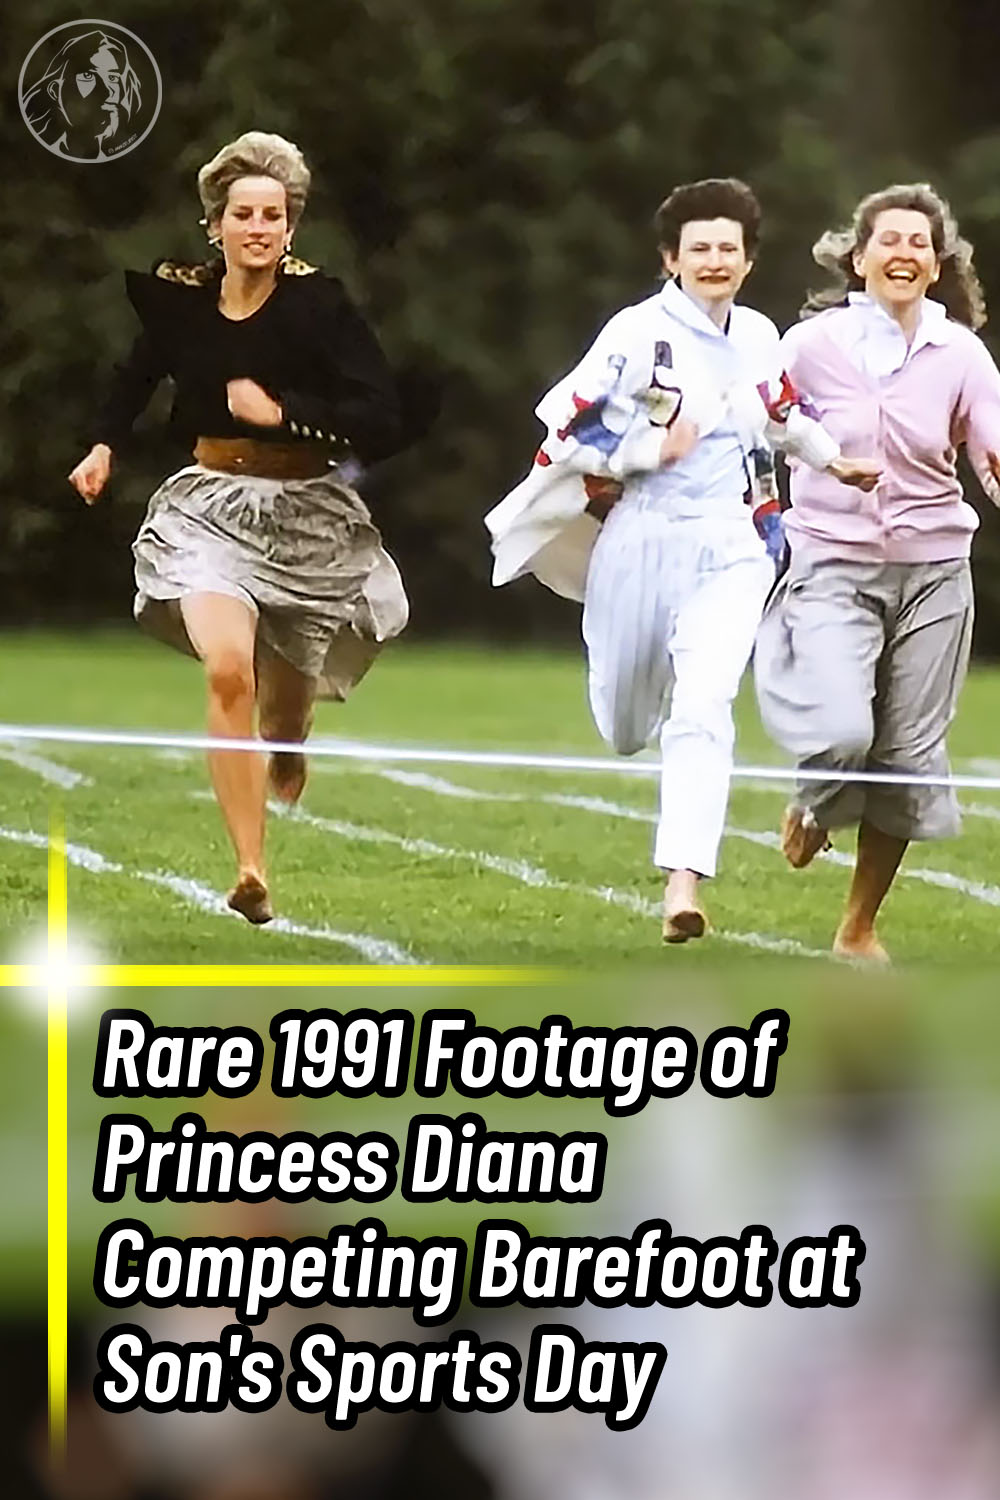 Rare 1991 Footage of Princess Diana Competing Barefoot at Son\'s Sports Day